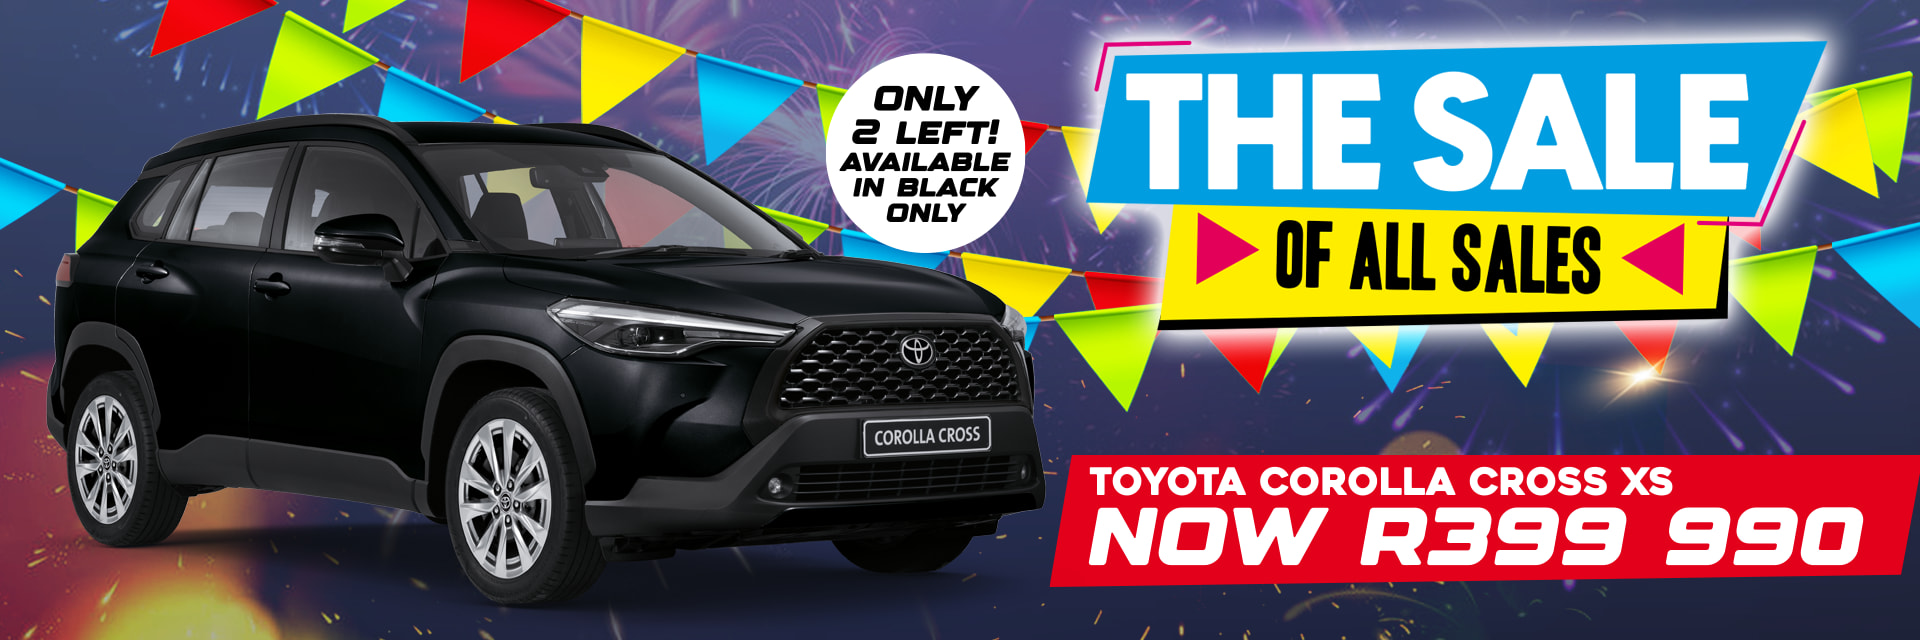 Drive the Future in Style with the Corolla Cross 1.8 XS CVT